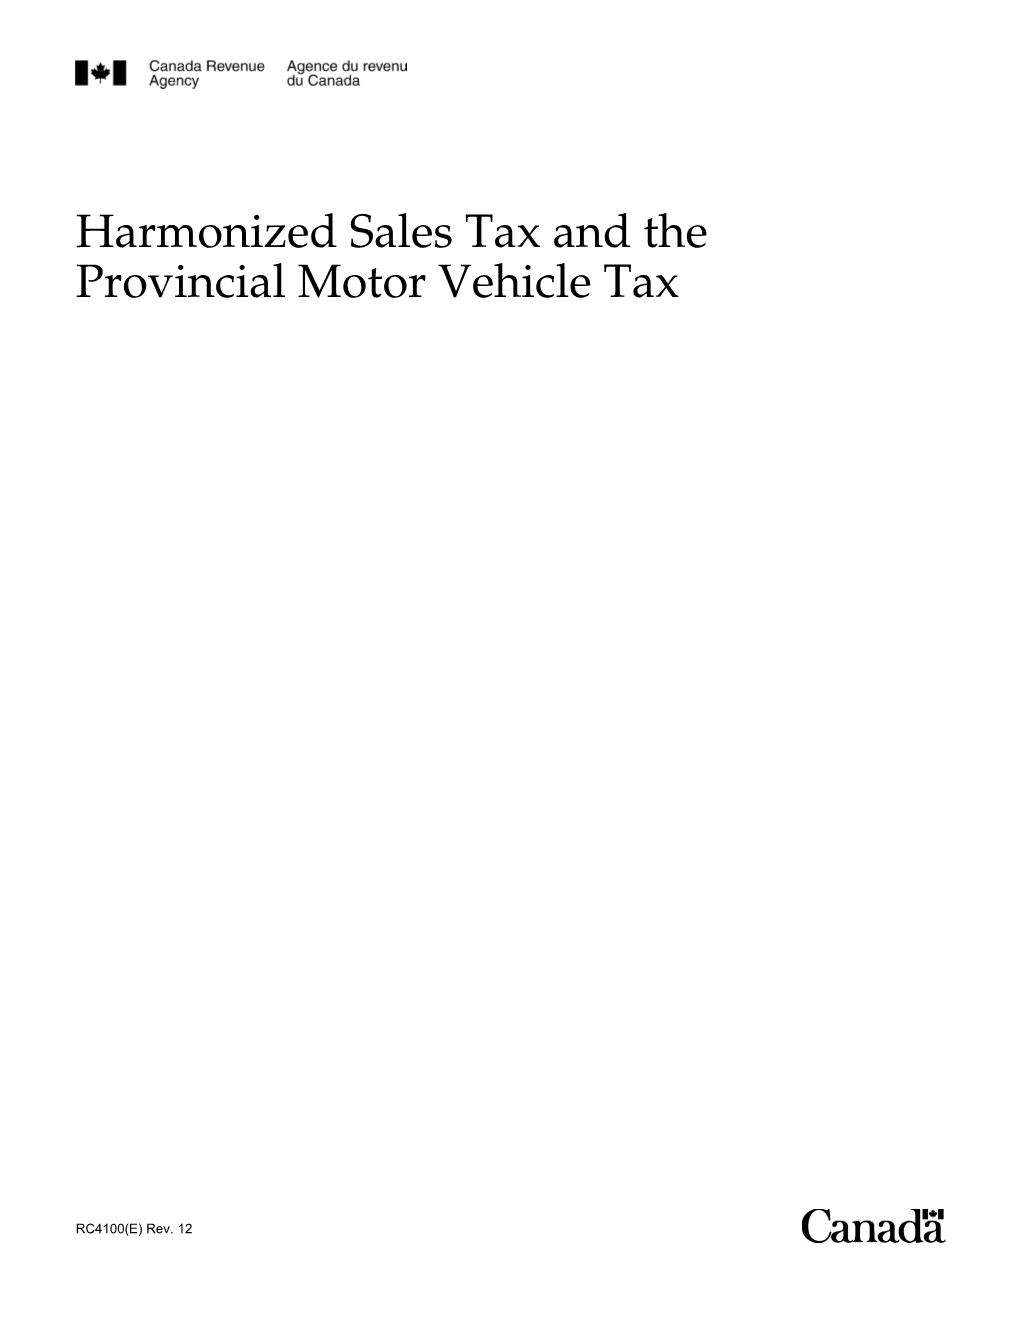 Harmonized Sales Tax and the Provincial Motor Vehicle Tax